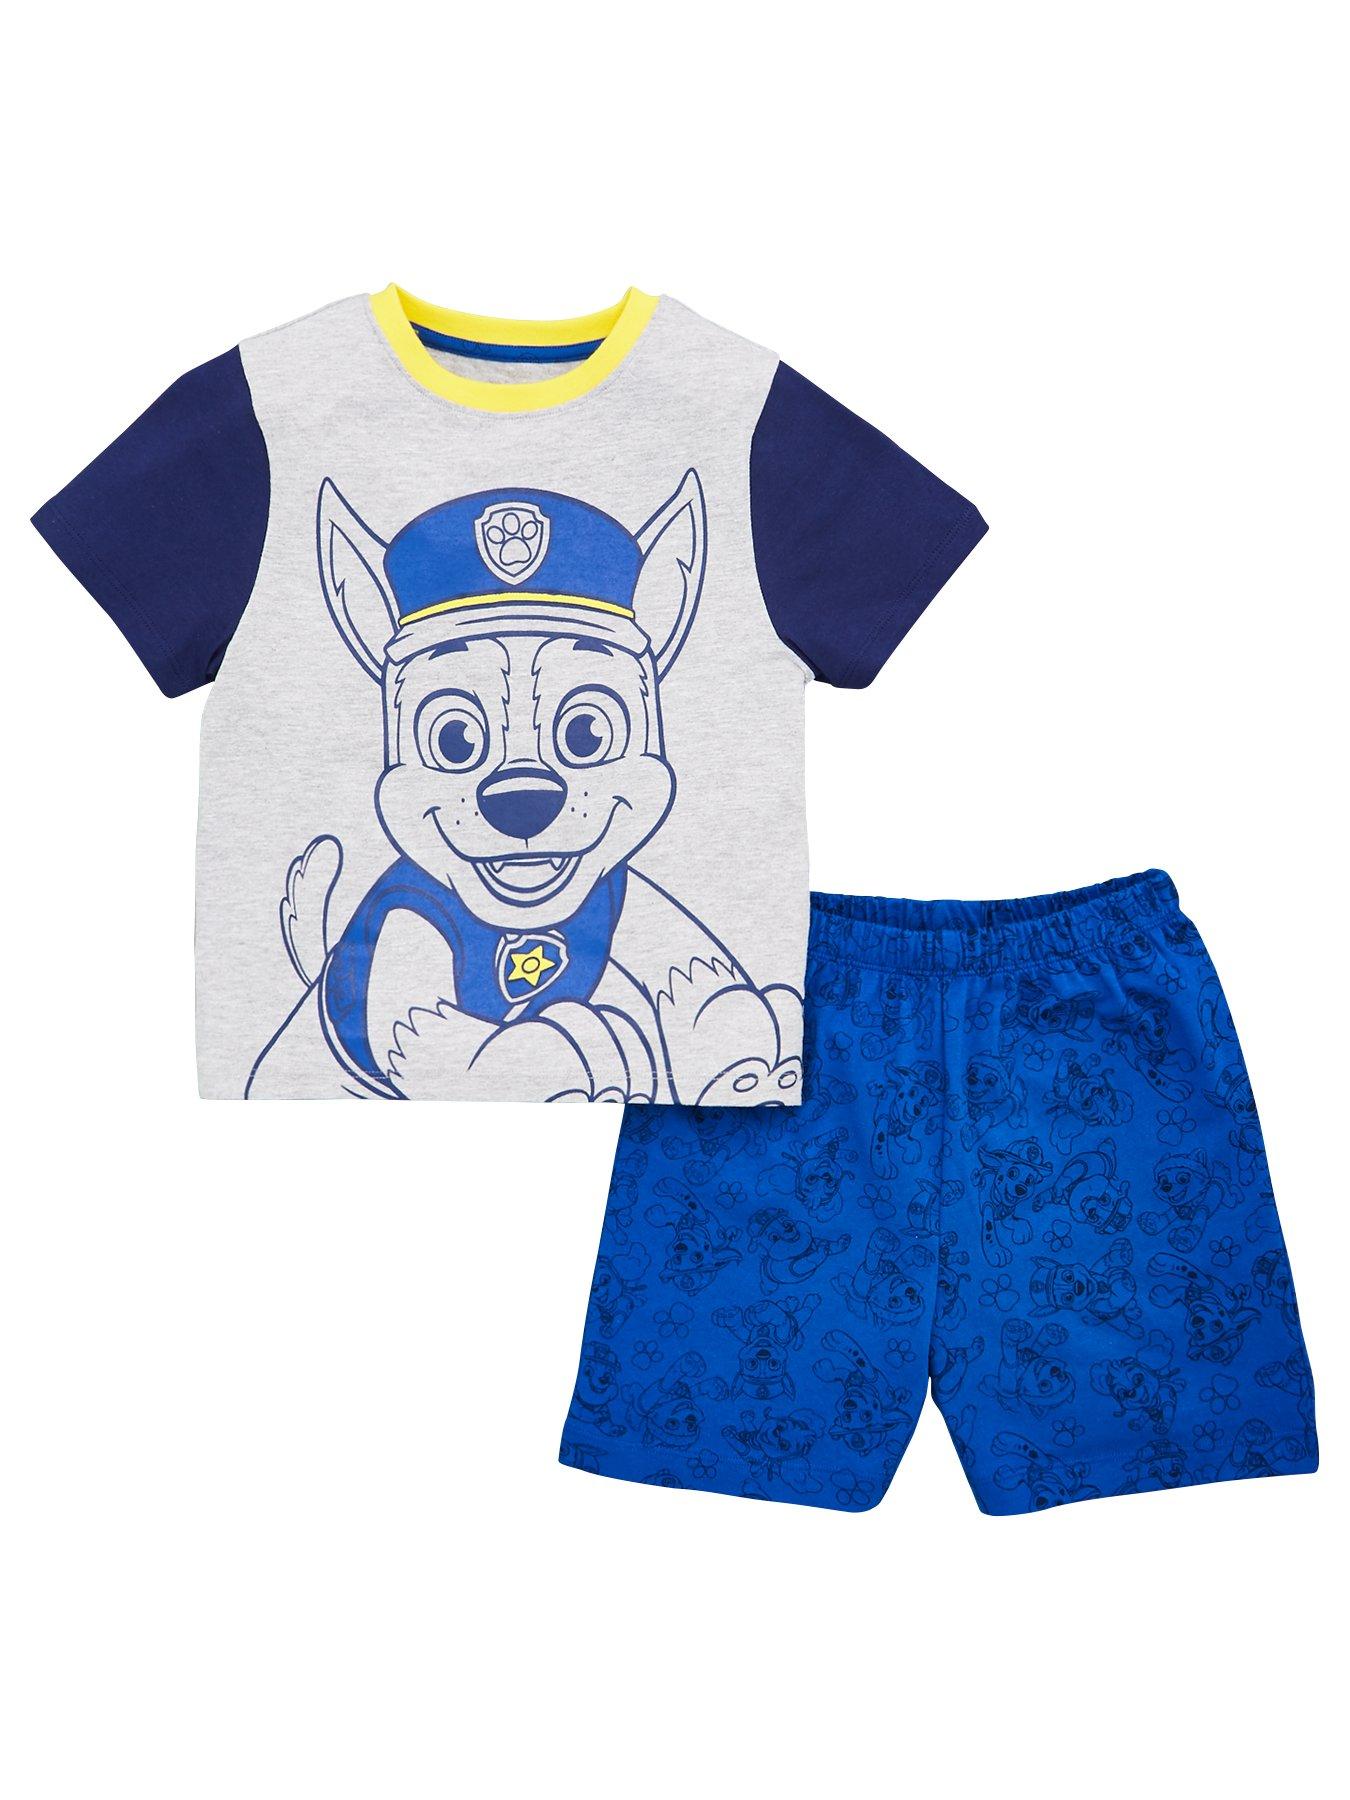 SIZE 2 TO 6 Details about   BNWT PAW PATROL BOYS SWIMMING COSTUMES SET SWIMMERS 